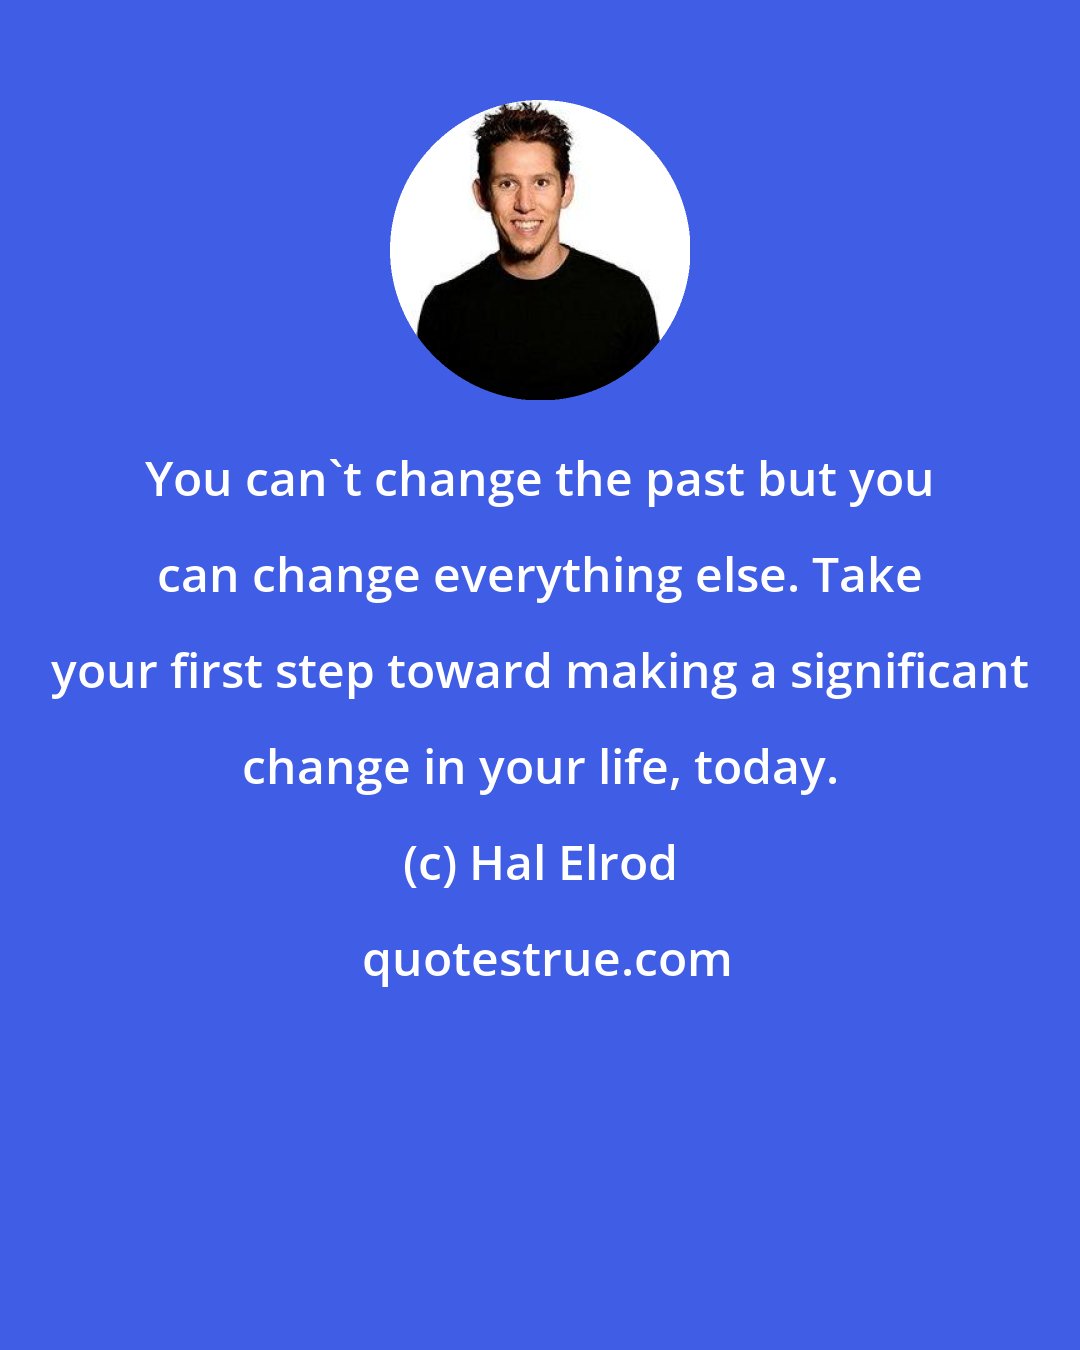 Hal Elrod: You can't change the past but you can change everything else. Take your first step toward making a significant change in your life, today.